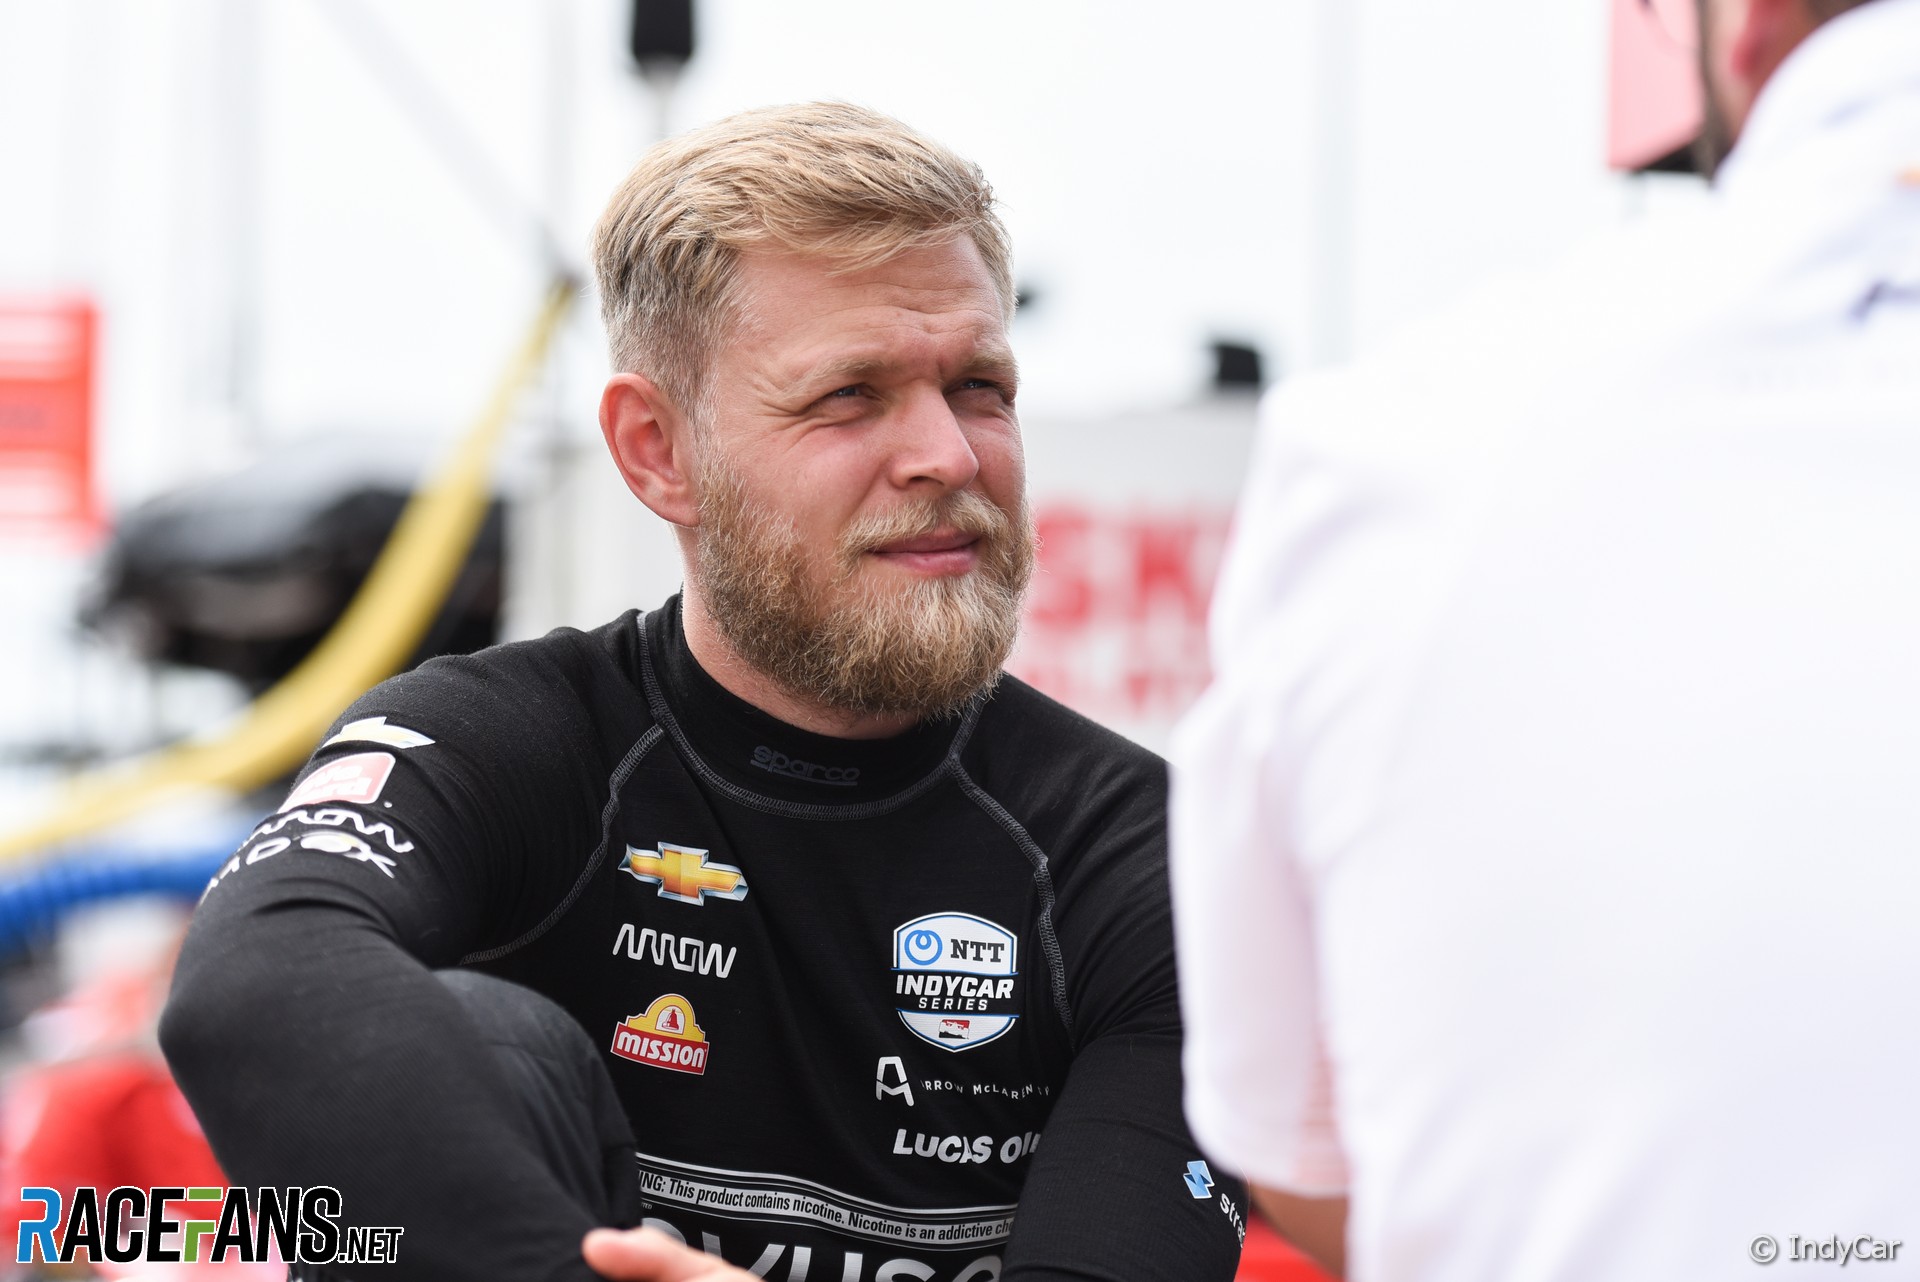 Magnussen found new respect for “unbelievably competitive” IndyCar in one-off race | 2022 F1 Season